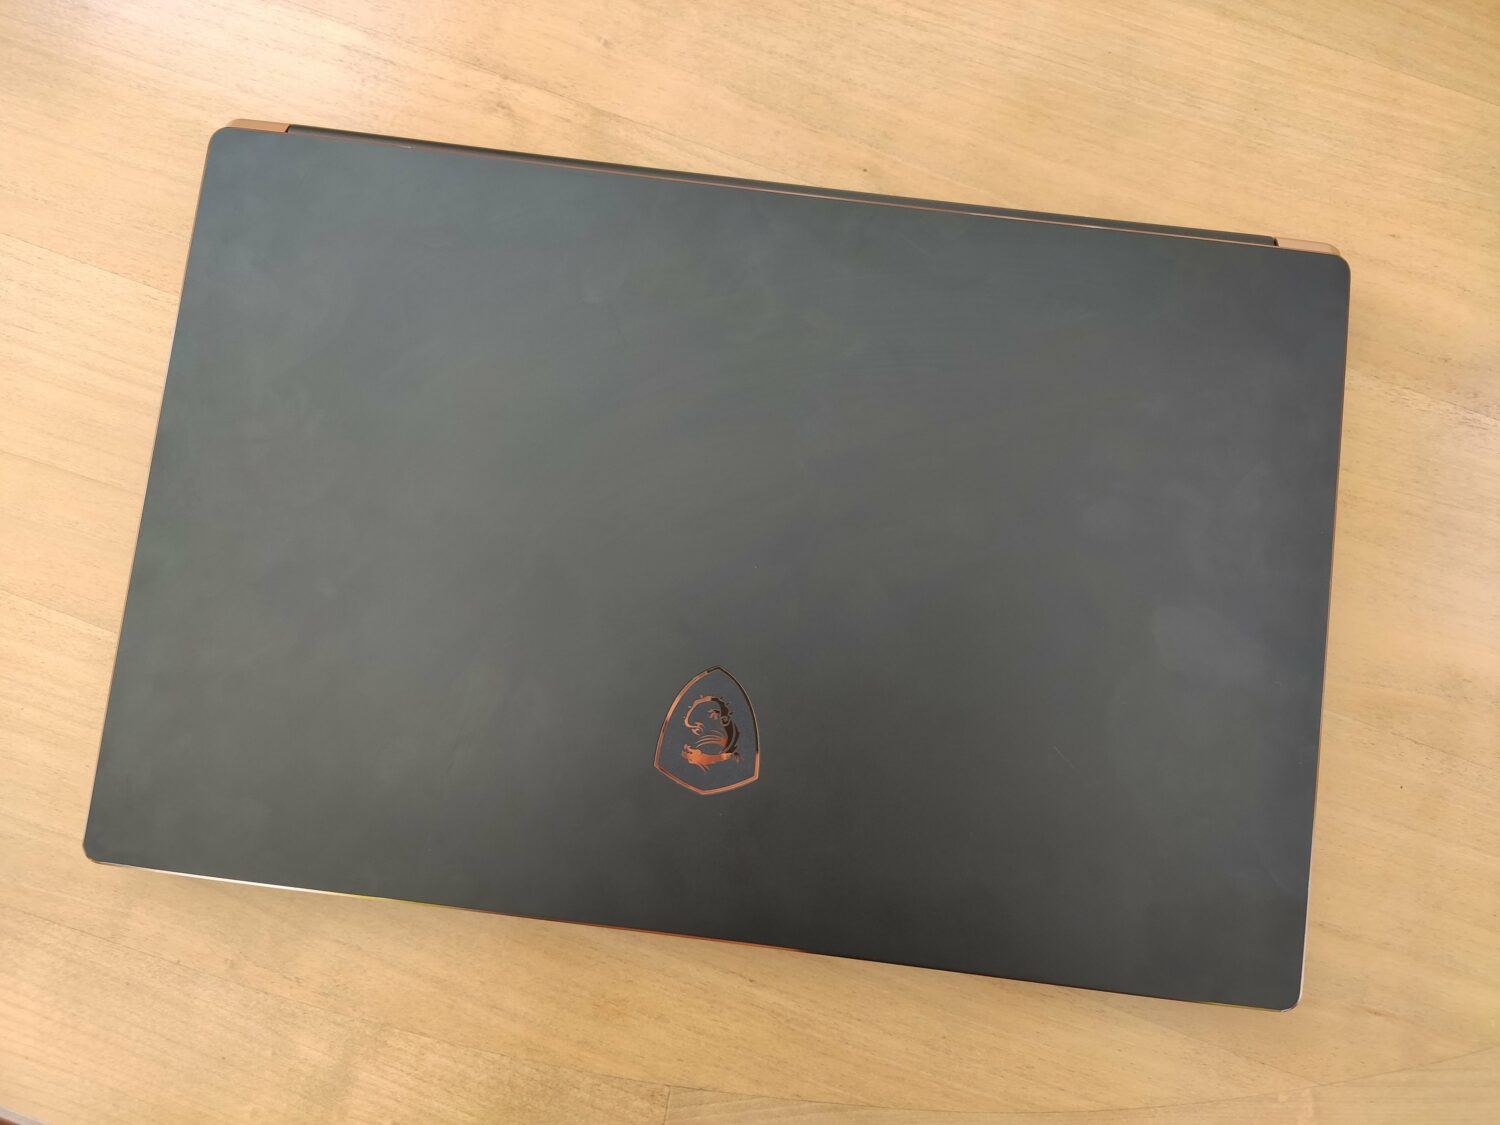 Dos MSI GS75 Stealth